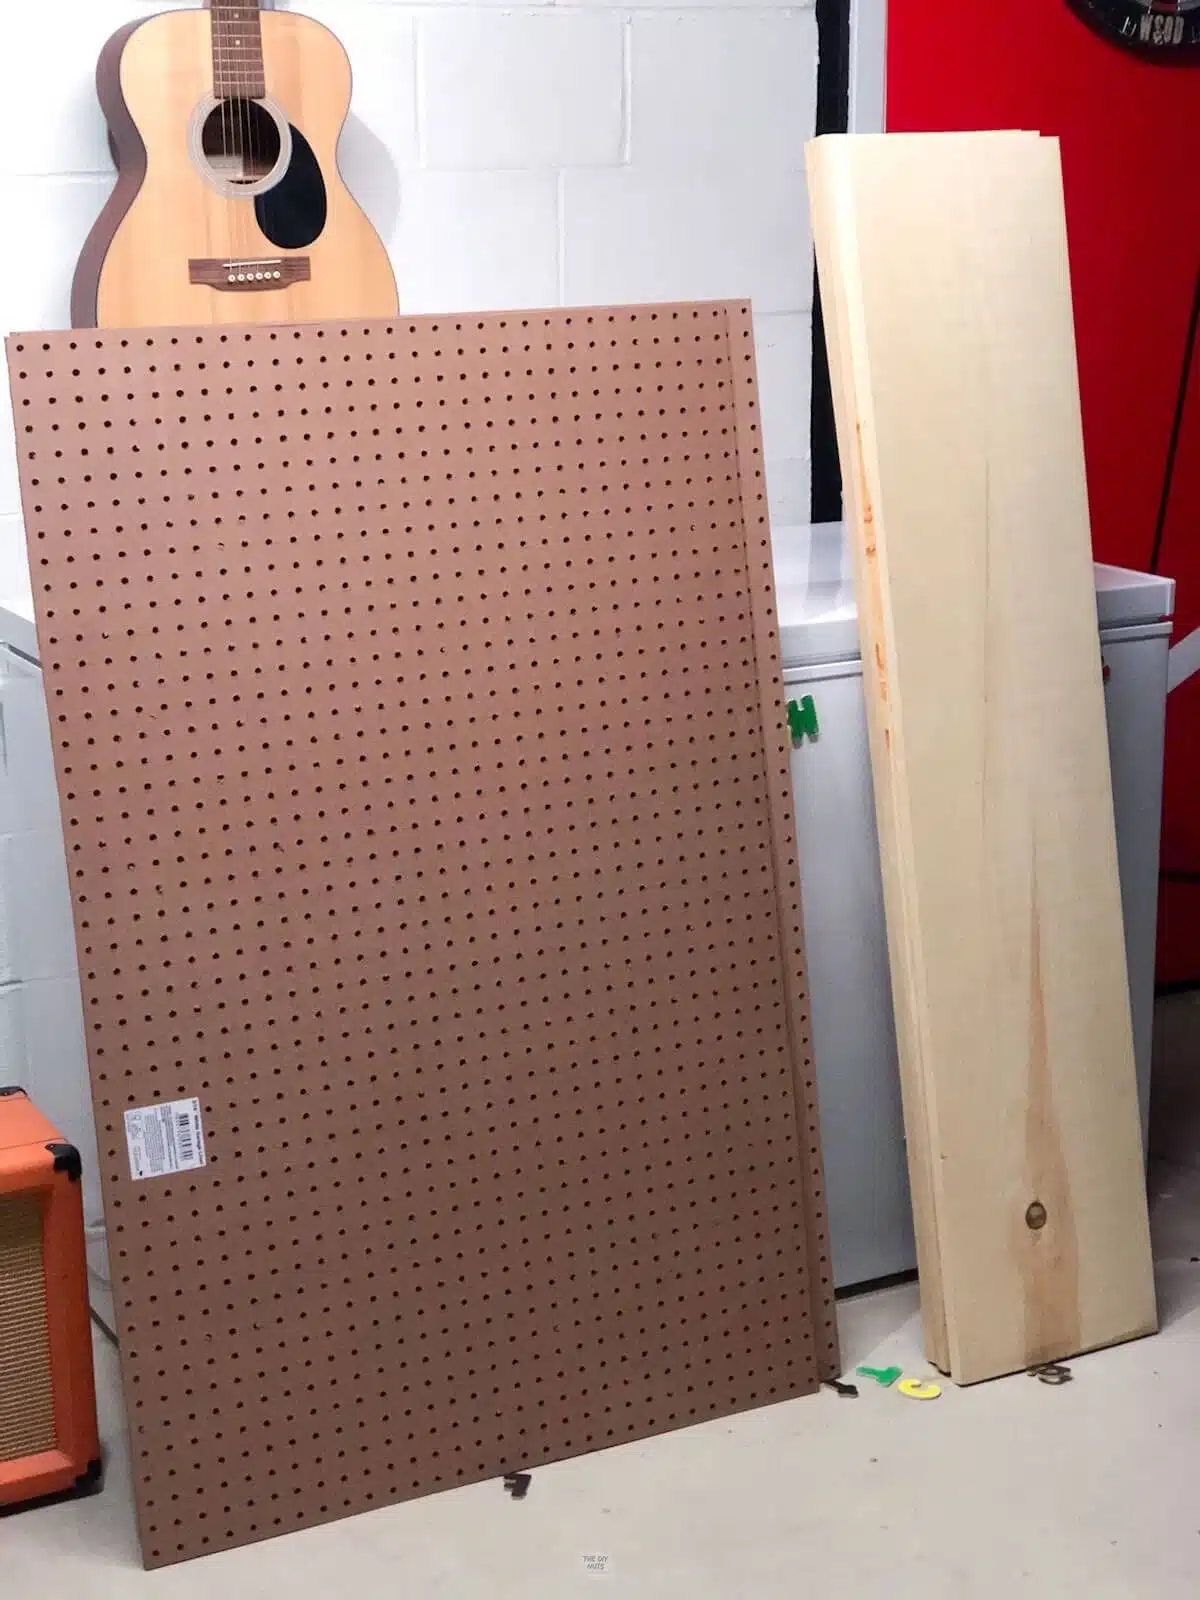 pegboard and wood leaning against deep freezer.